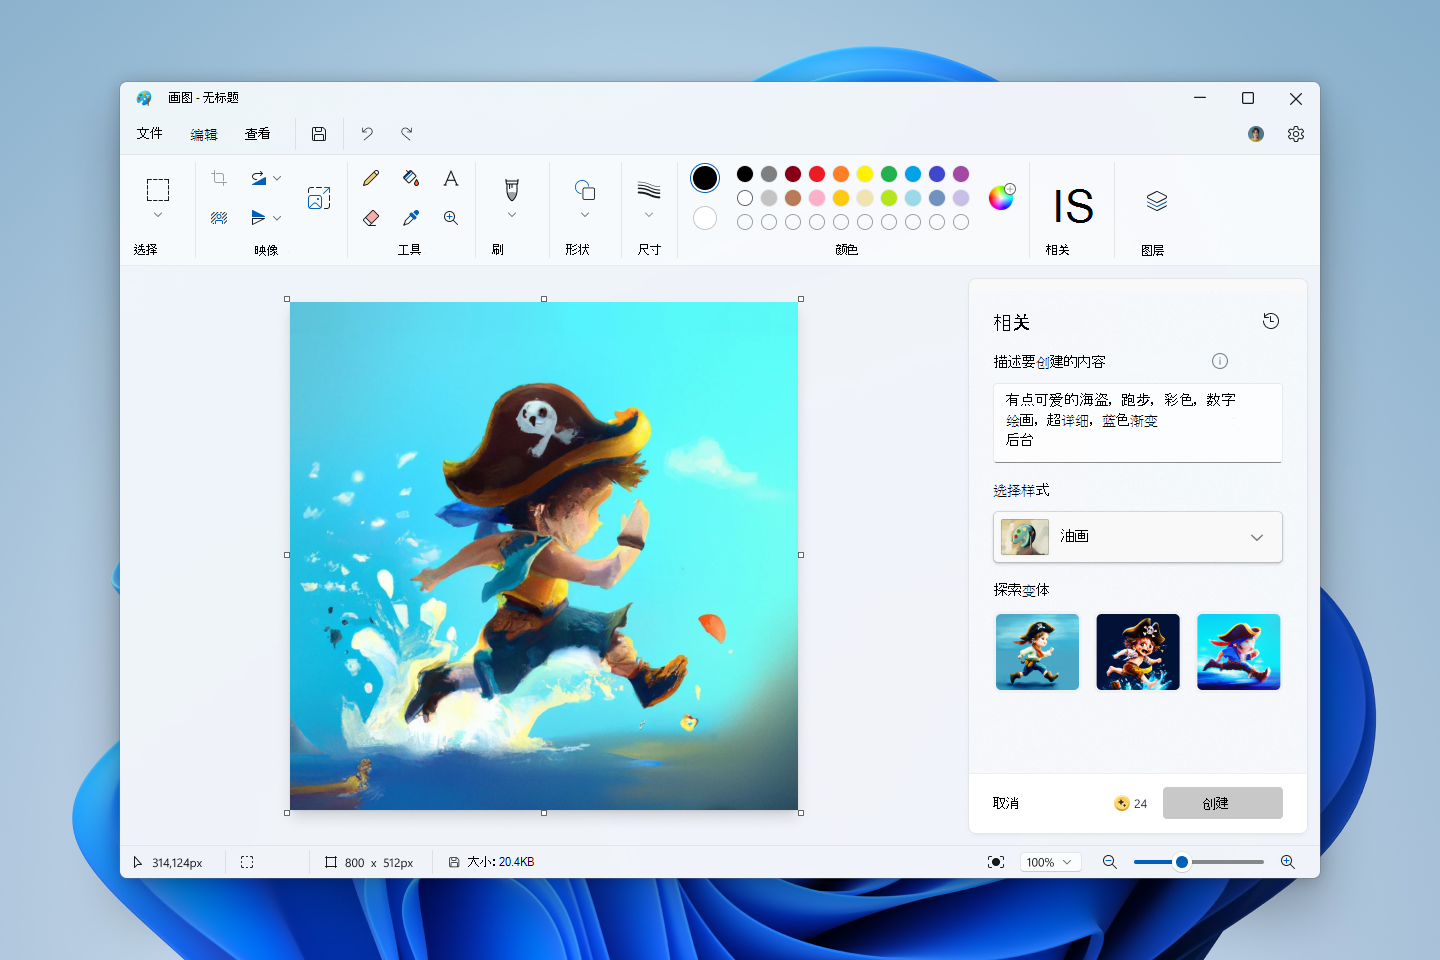 Paint Cocreator 生成的艺术图像